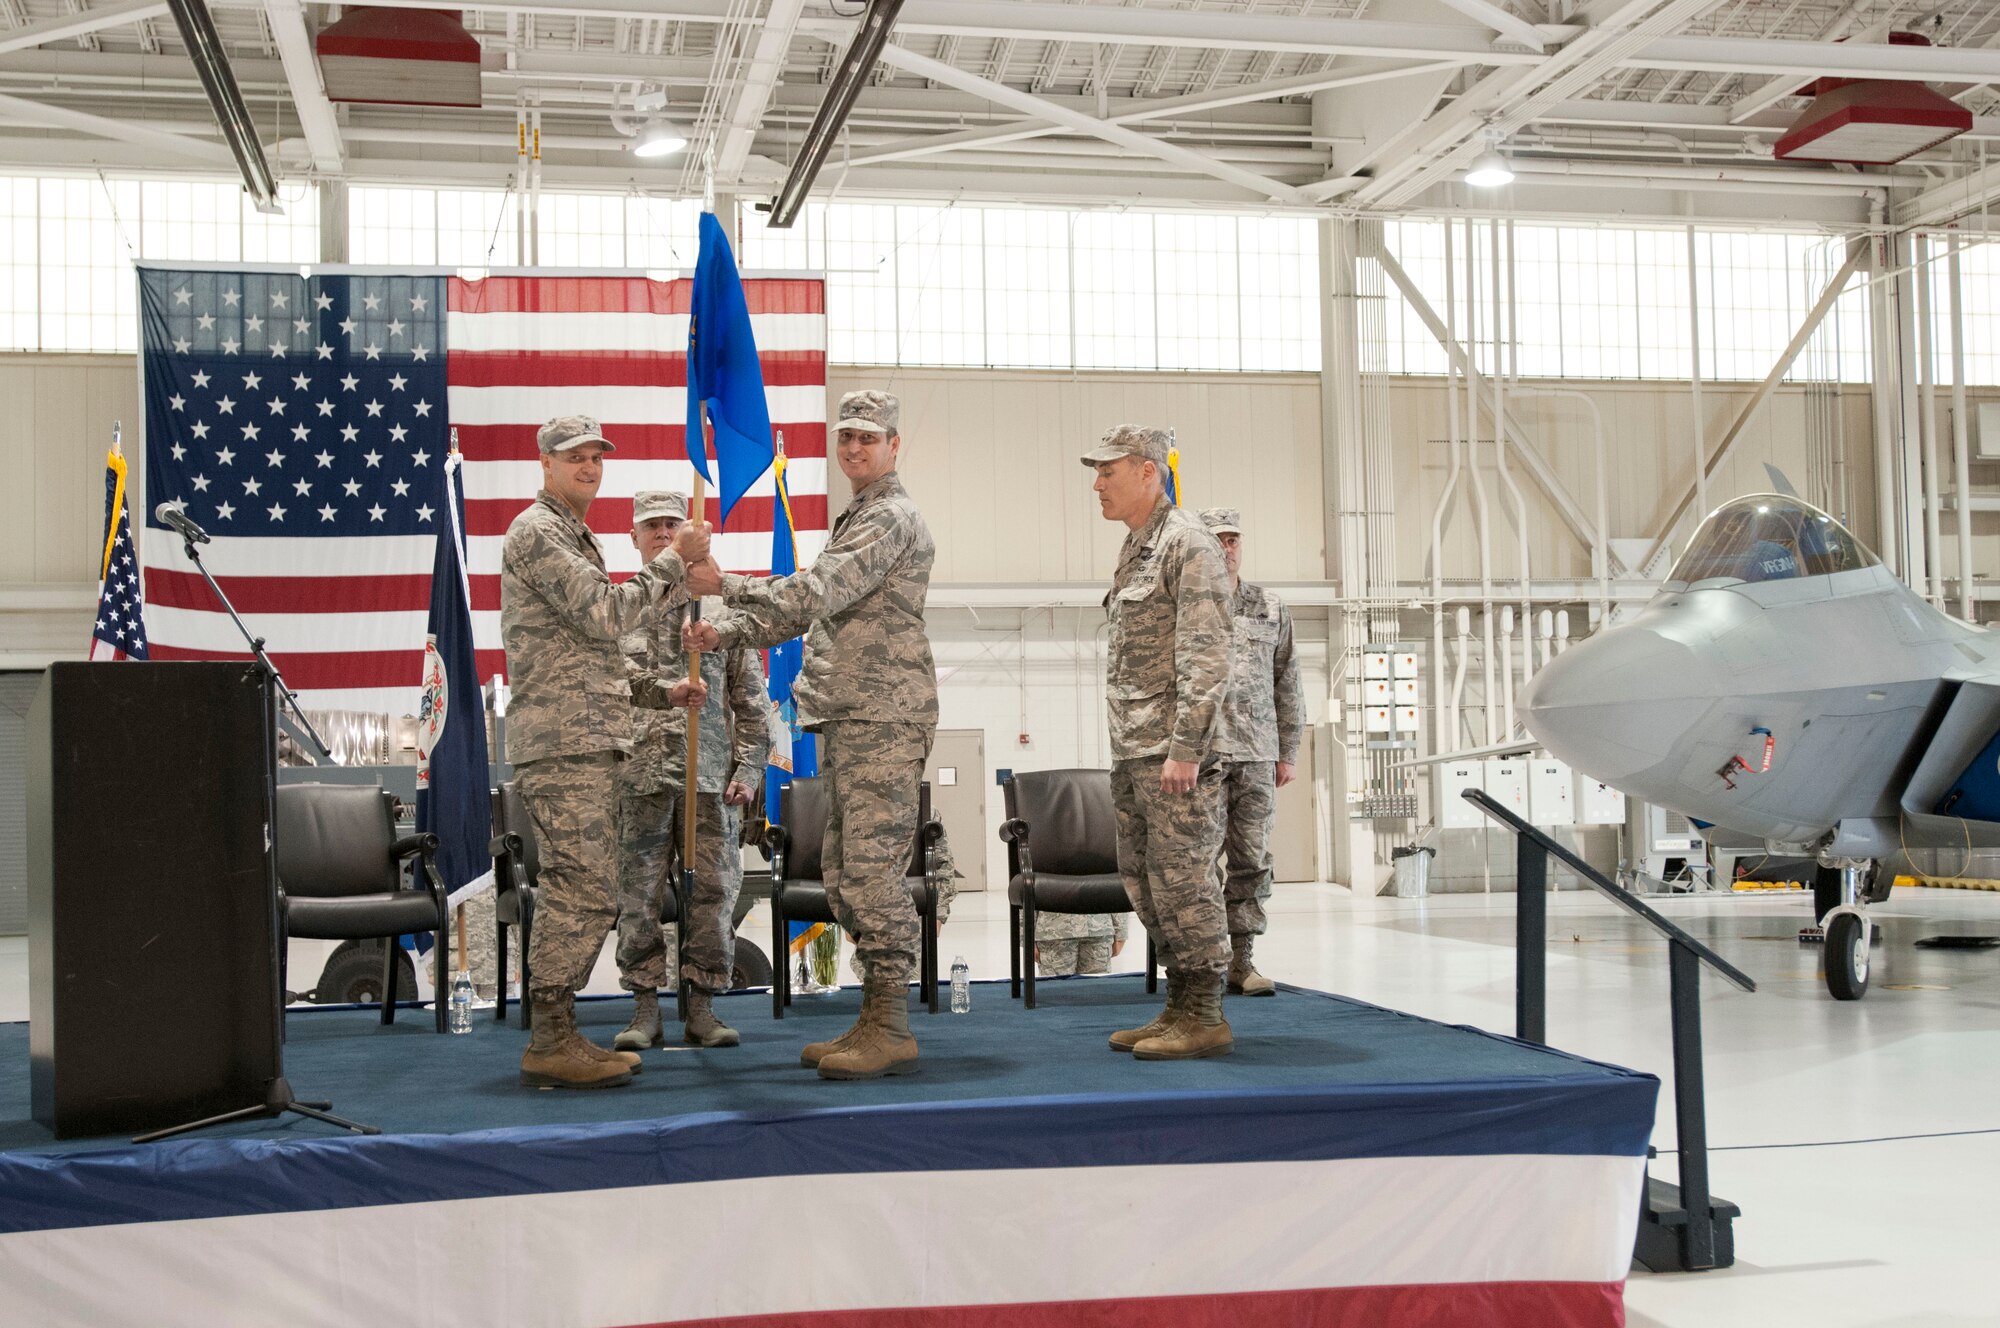 The Virginia Air National Guard 192nd Fighter Wing welcomed Col. Stephen H. Bunting, former 192nd Maintenance Group commander, as the new Wing commander during a joint change of command ceremony March 19, 2016, at Joint Base Langley-Eustis, Virginia. (U.S. Air National Guard photo by Technical Sgt. Jonathan P. Garcia)